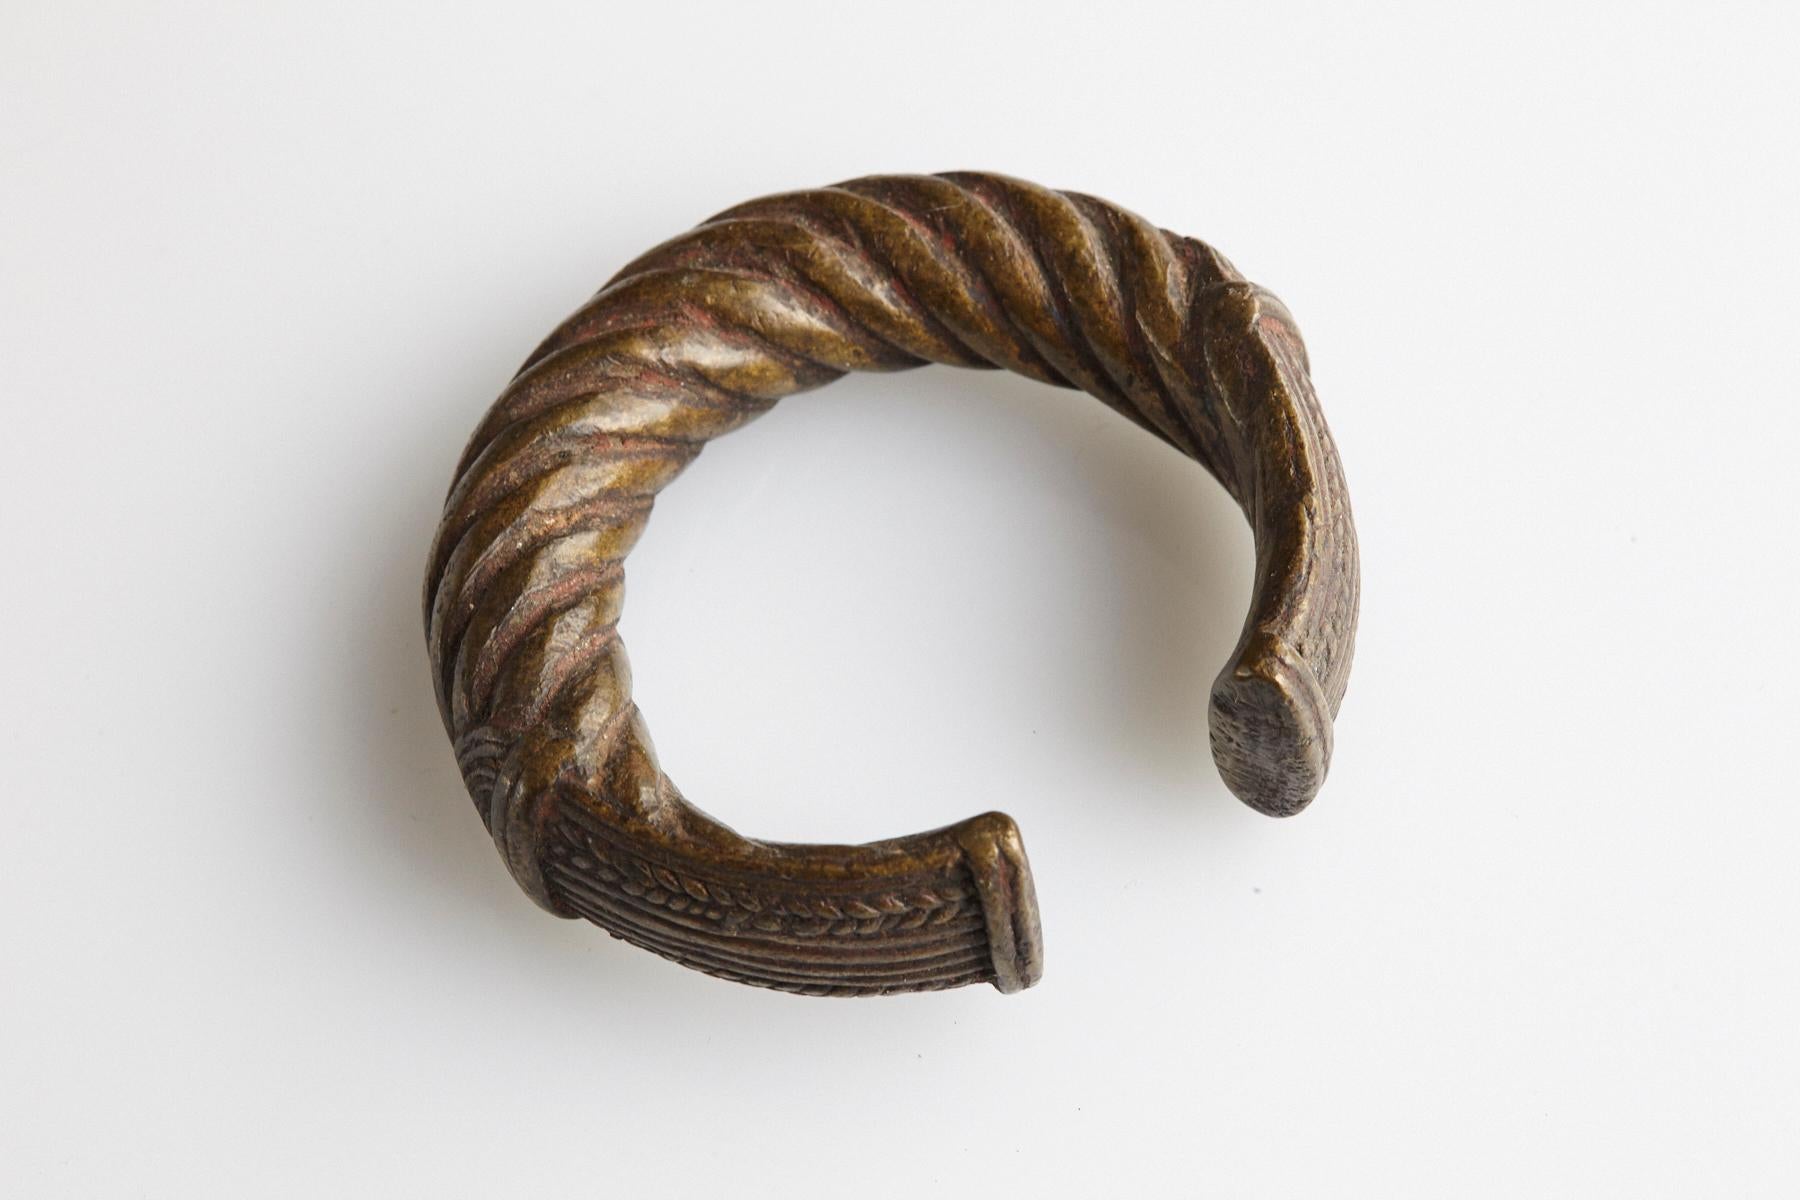 Bronze Currency Bracelet/Manilla, Dogon People, Burkina Faso, 19th c. - No 5 For Sale 1